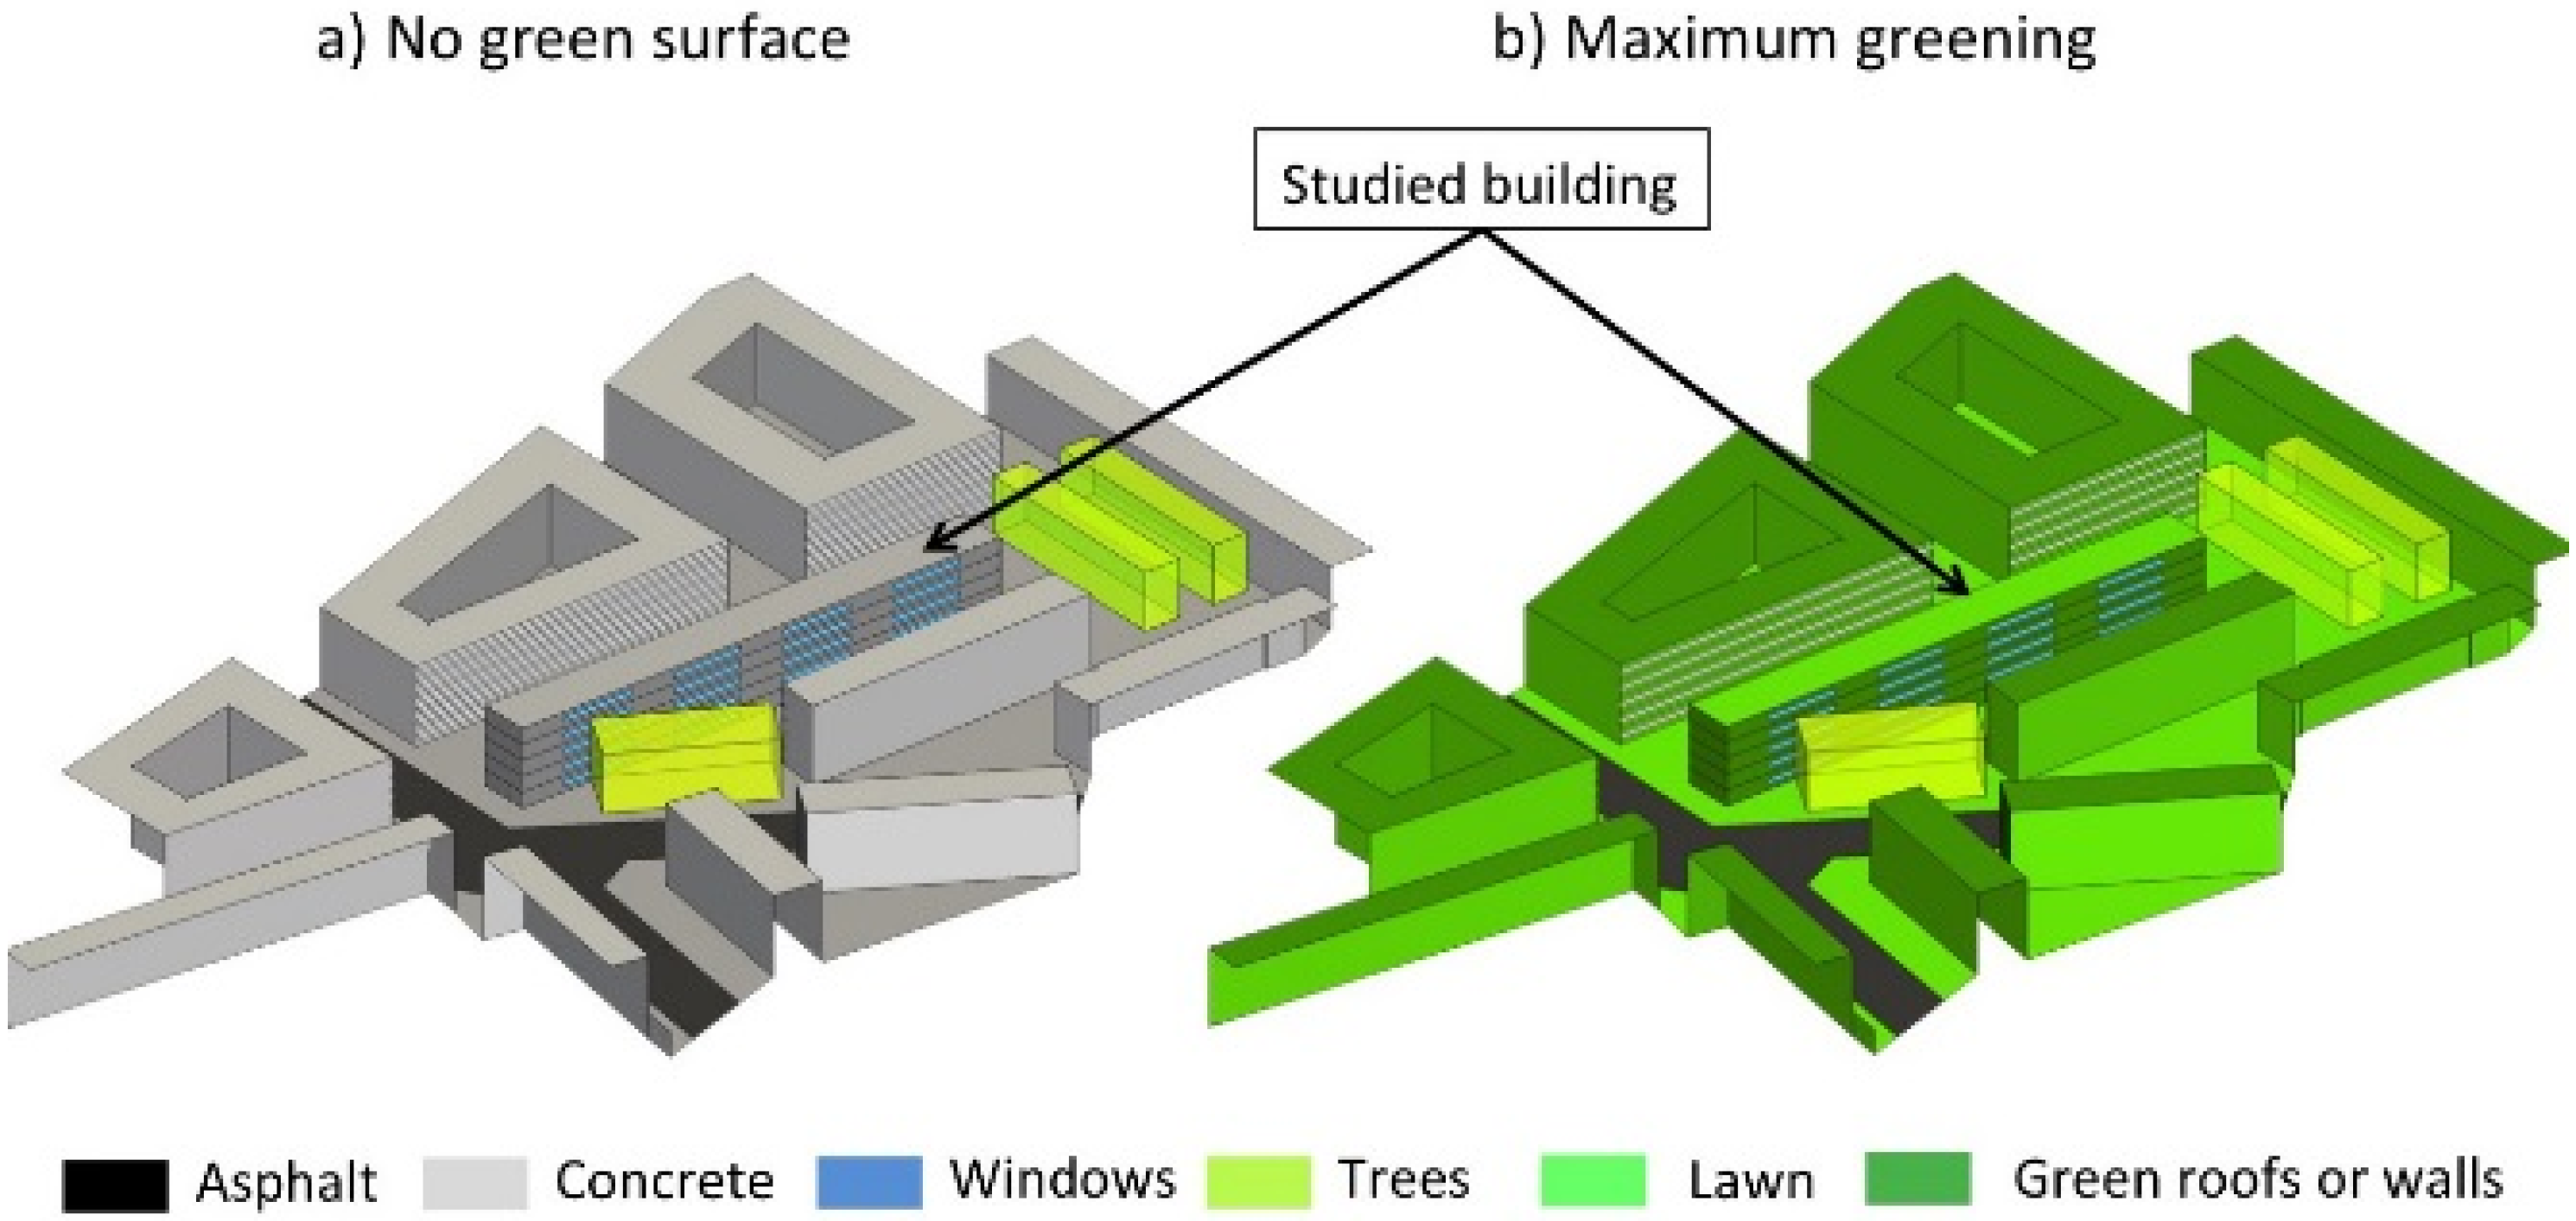 Energies | Free Full-Text | Direct and Indirect Impacts of Vegetation on  Building Comfort: A Comparative Study of Lawns, Green Walls and Green Roofs  | HTML